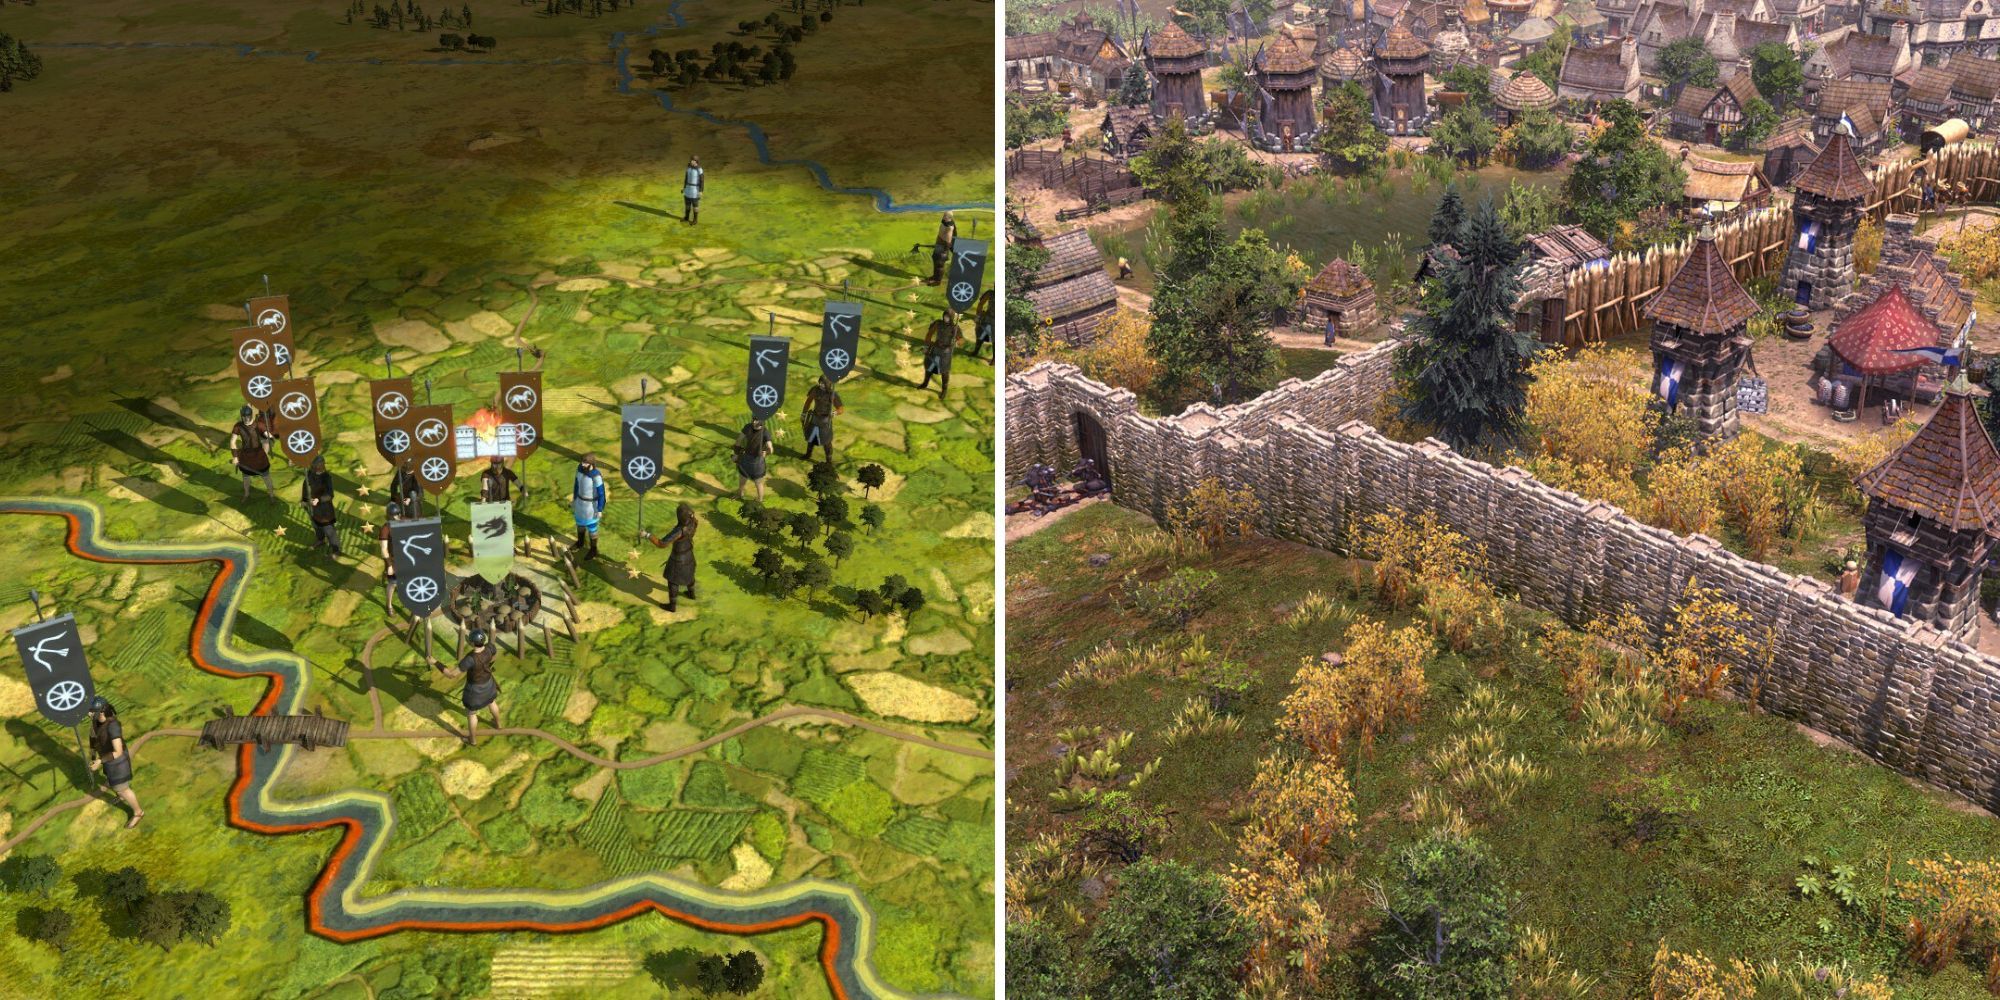 A green battle map of allied and enemy forces in Total War: Rome Remastered, and a bustling settlement surrounded by stone walls in Farthest Frontier.